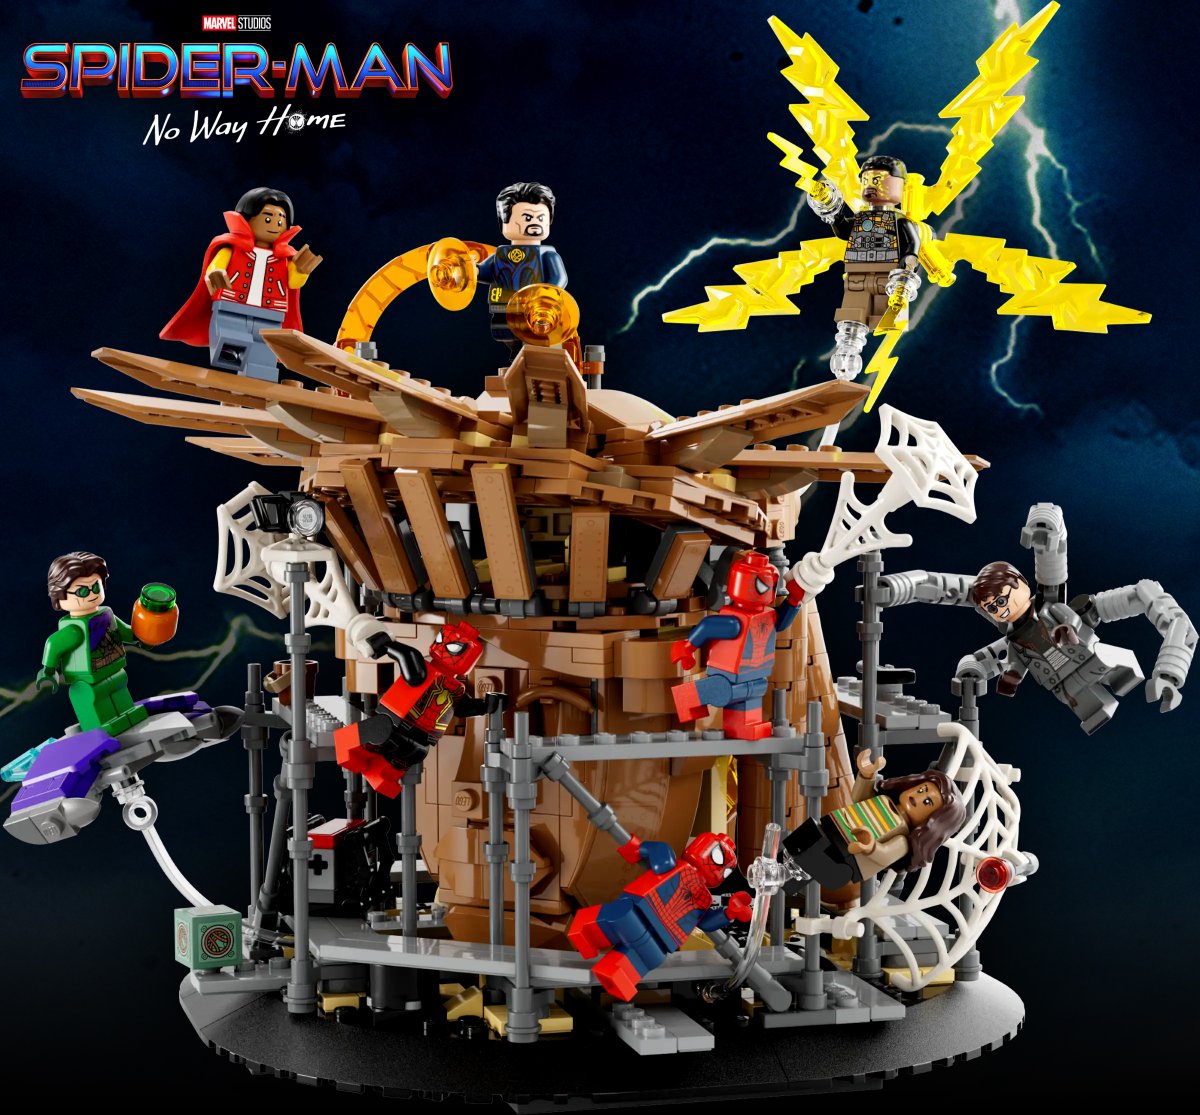 LEGO has unveiled a 900-piece set for #SpiderManNoWayHome's 'Final Battle!' Photos & details: thedirect.com/article/lego-s…